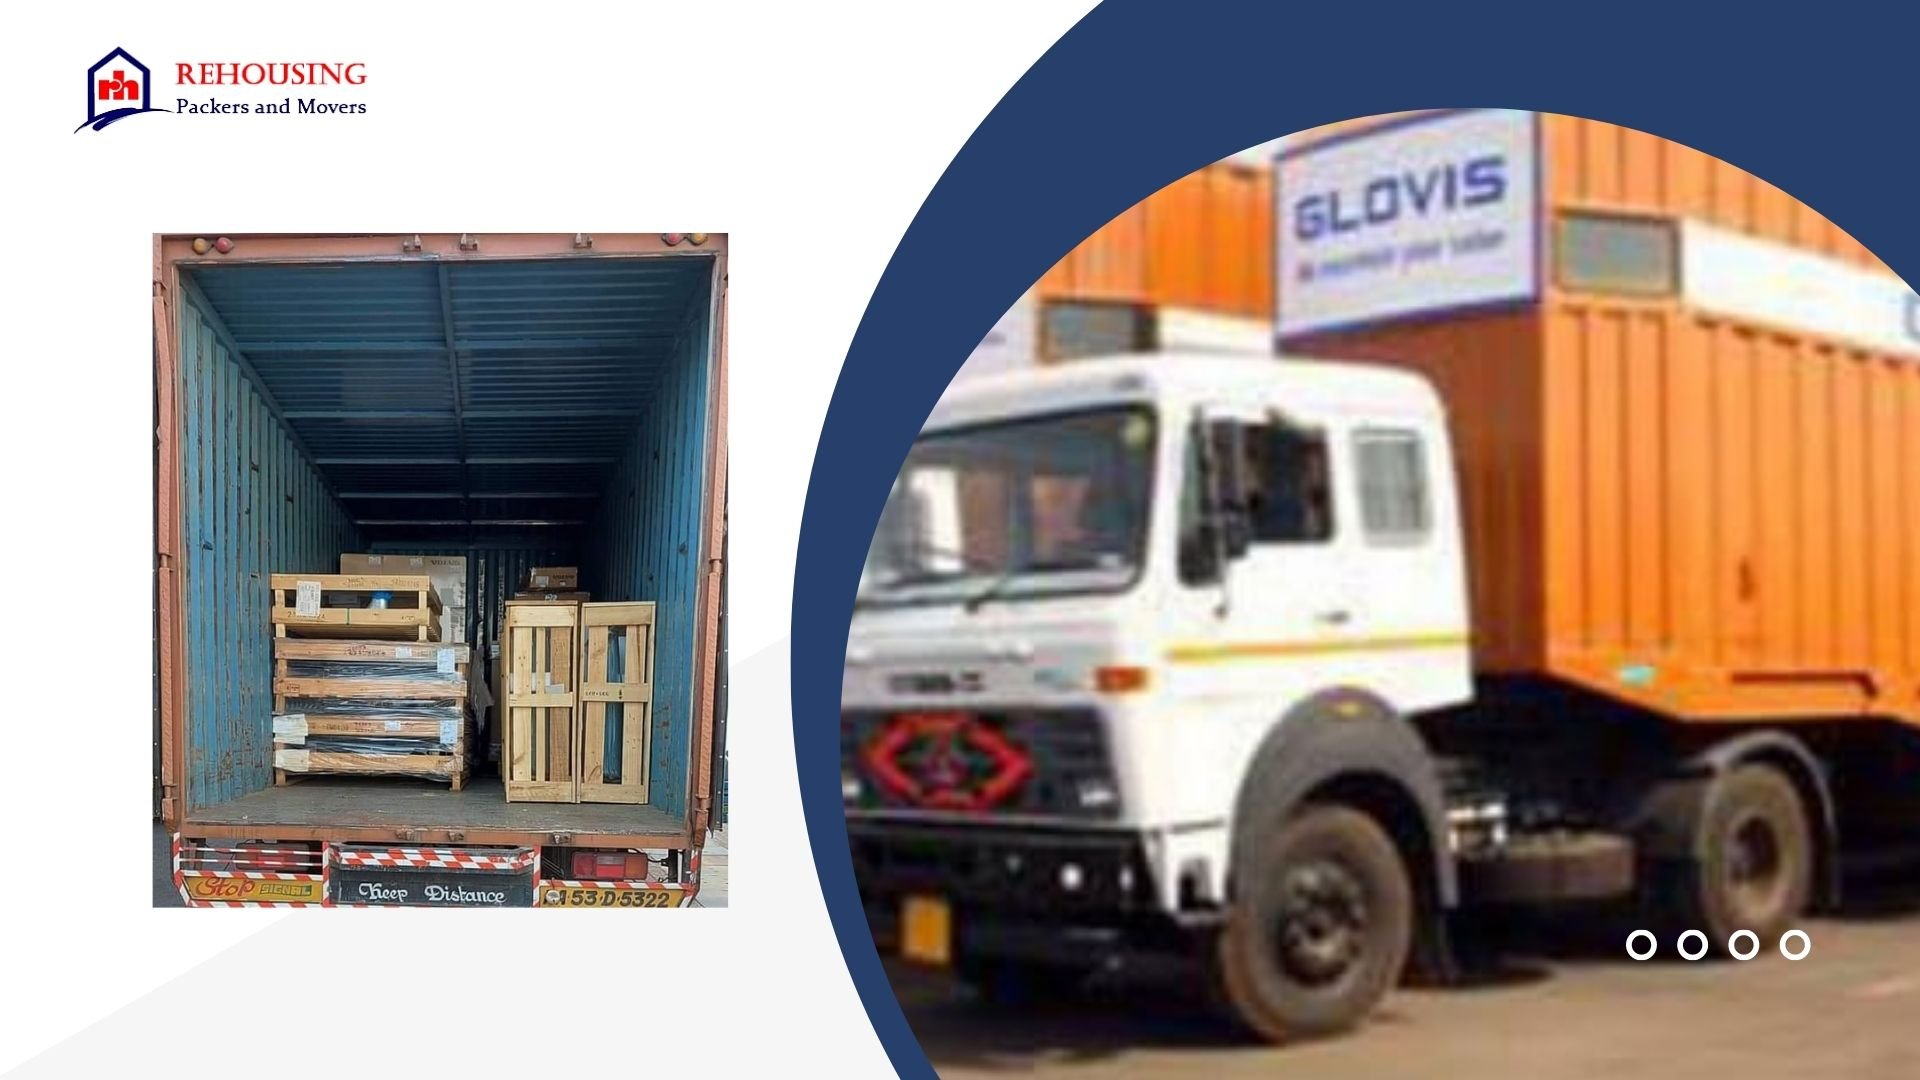 Packers and Movers From Dehradun to Gurgaon | Rehousing packers and movers